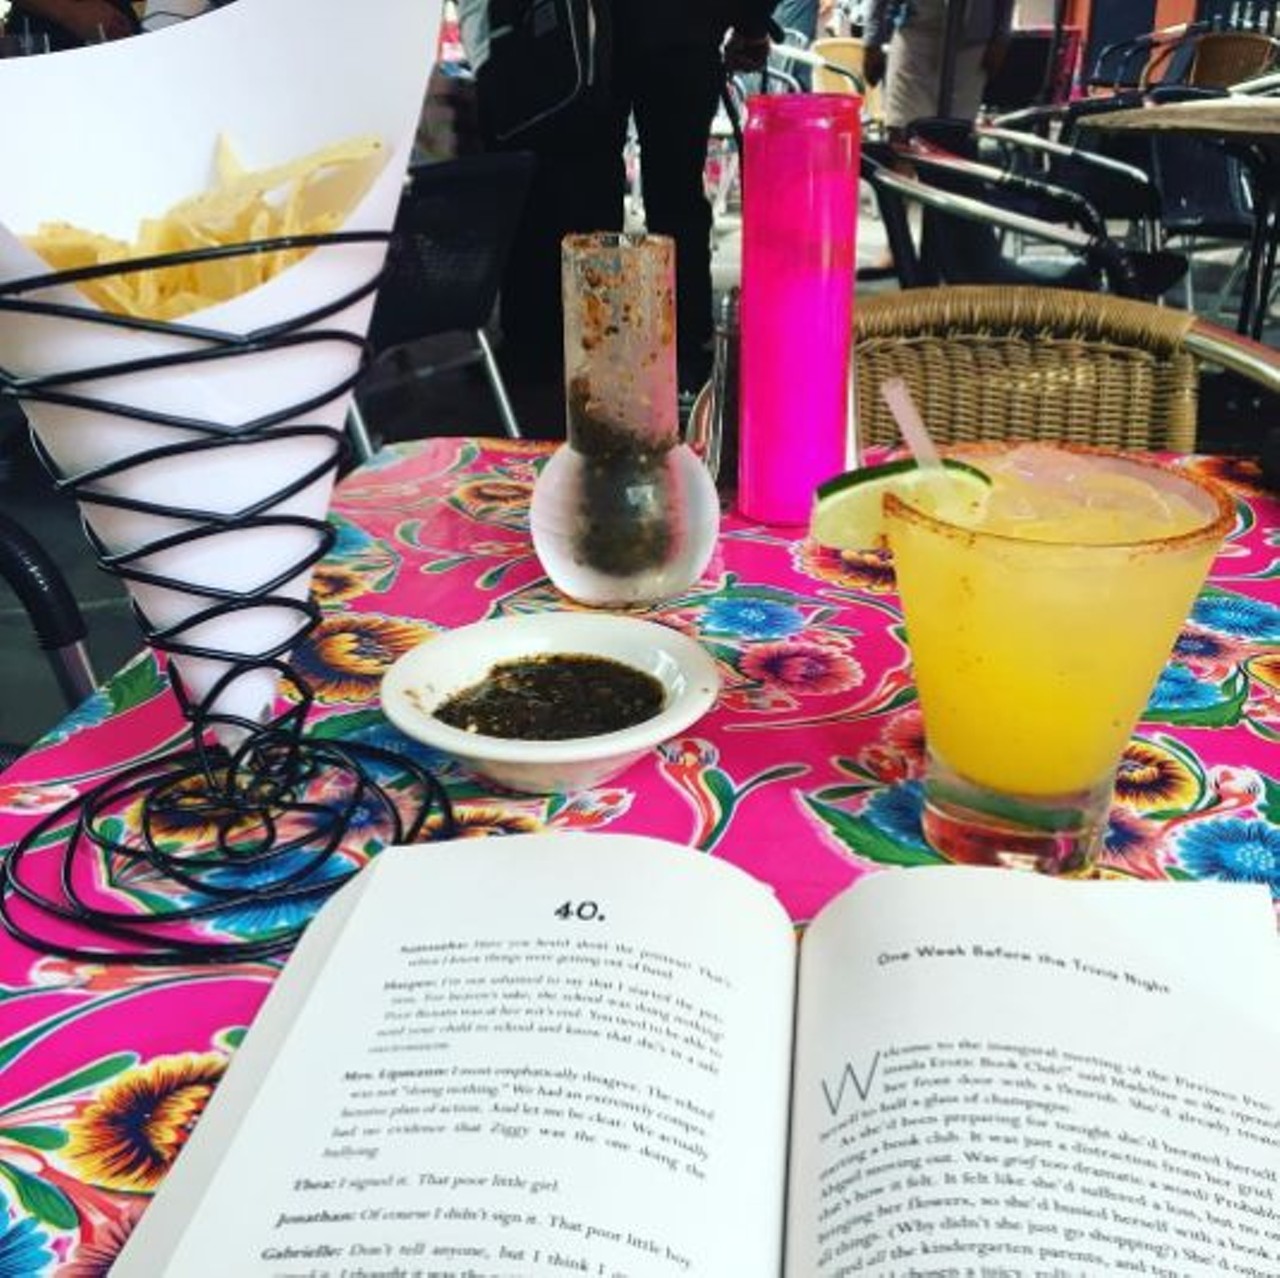 Acenar
146 E Houston St, (210) 222-2362
A great spot to relax and enjoy a margarita and their signature, smokey salsa. Acenar&#146;s bright and fun atmosphere makes for a perfect happy hour location. 
Photo via Instagram, melanie.cenicola